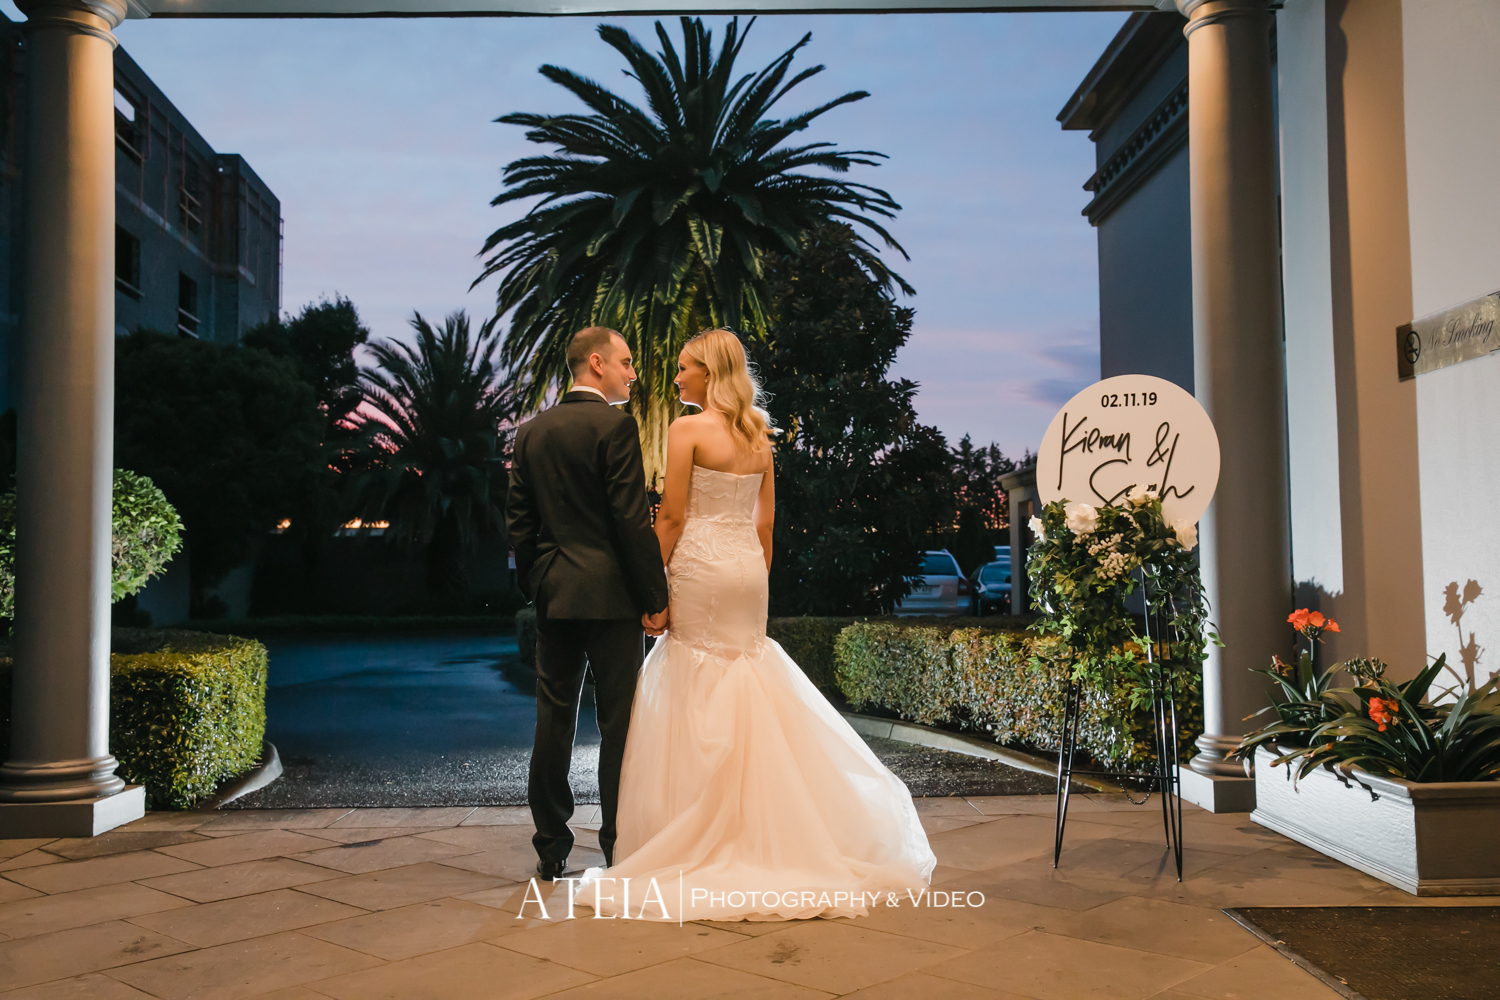 , Manor on High Wedding Photography Melbourne by ATEIA Photography &#038; Video